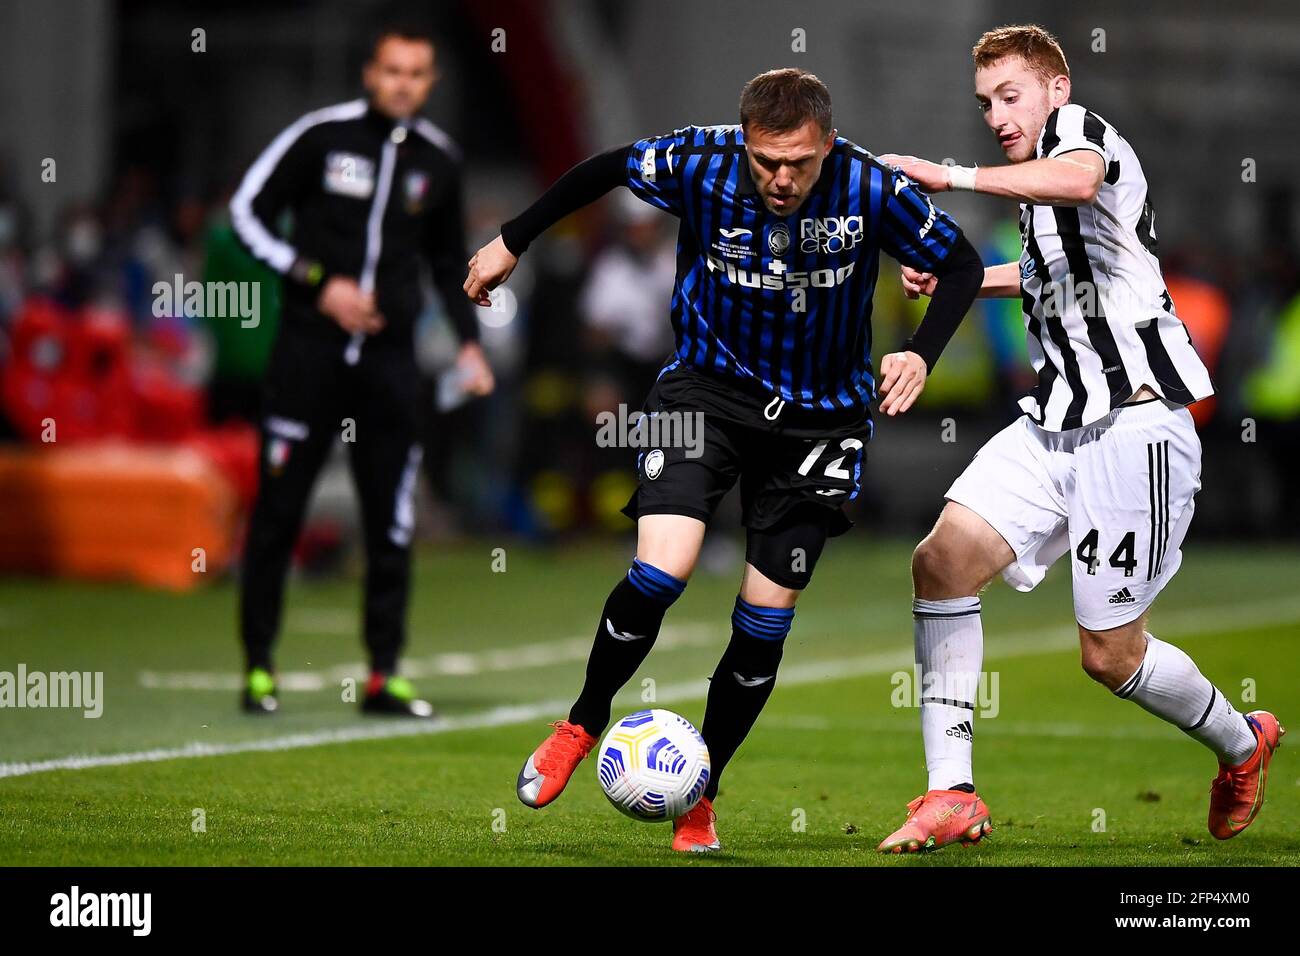 Reggio Emilia, Italy. 19 May 2021. Josip Ilicic (L) of Atalanta BC is challenged by Dejan Kulusevski of Juventus FC during the TIMVISION Cup final football match between Atalanta BC and Juventus FC. Credit: Nicolò Campo/Alamy Live News Stock Photo